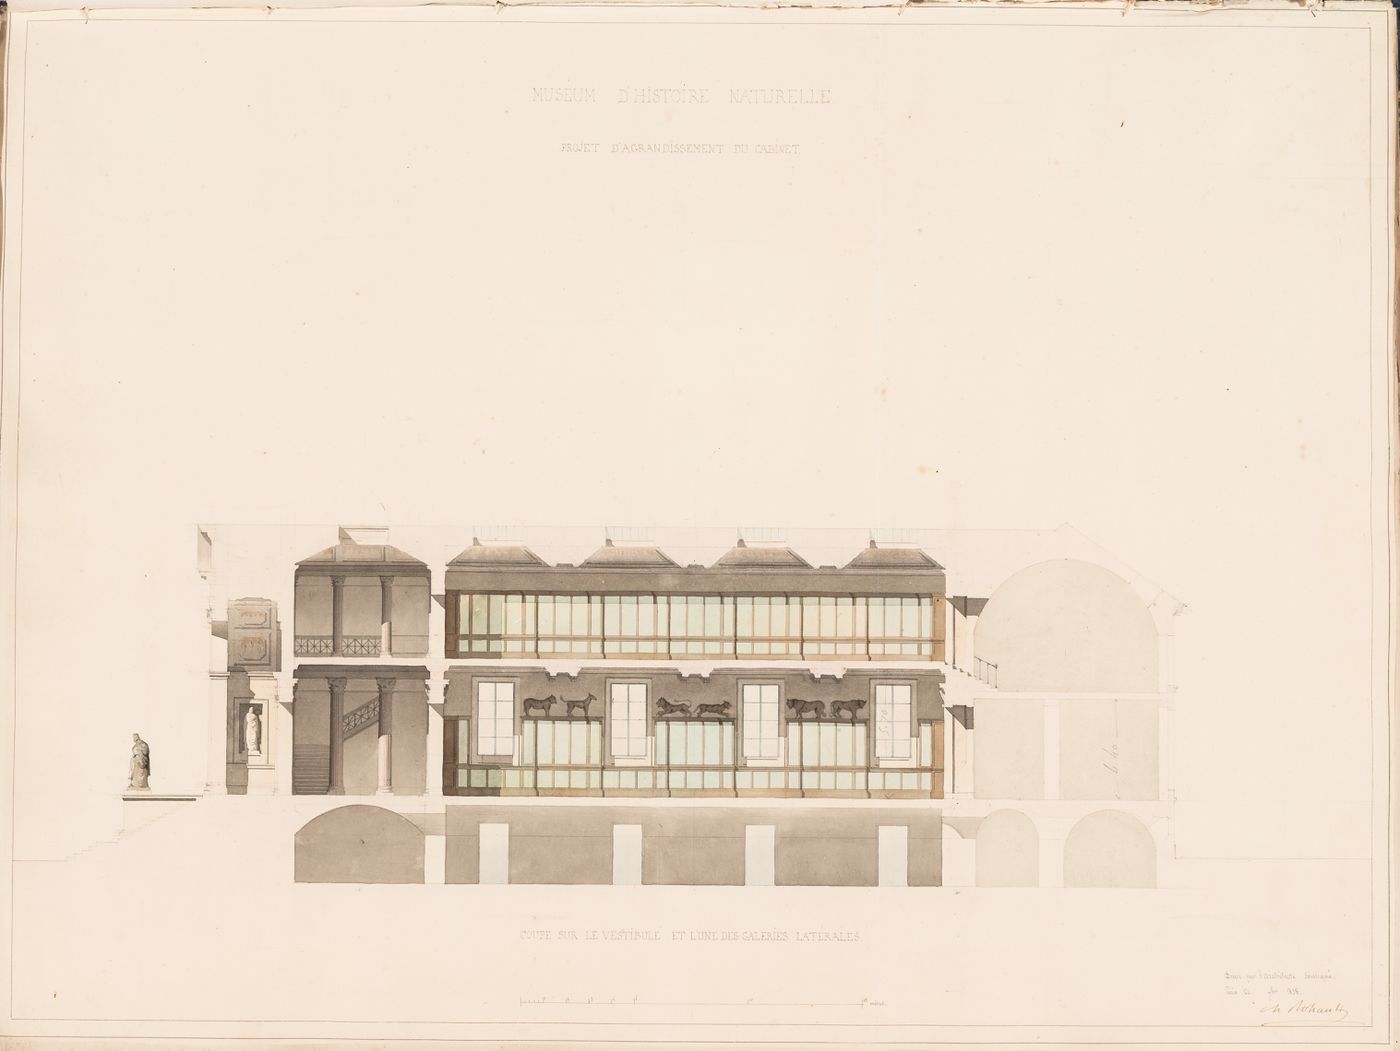 Project for a Galerie de zoologie with a single row of galleries and a central courtyard, 1838: Section through the vestibule and side galleries